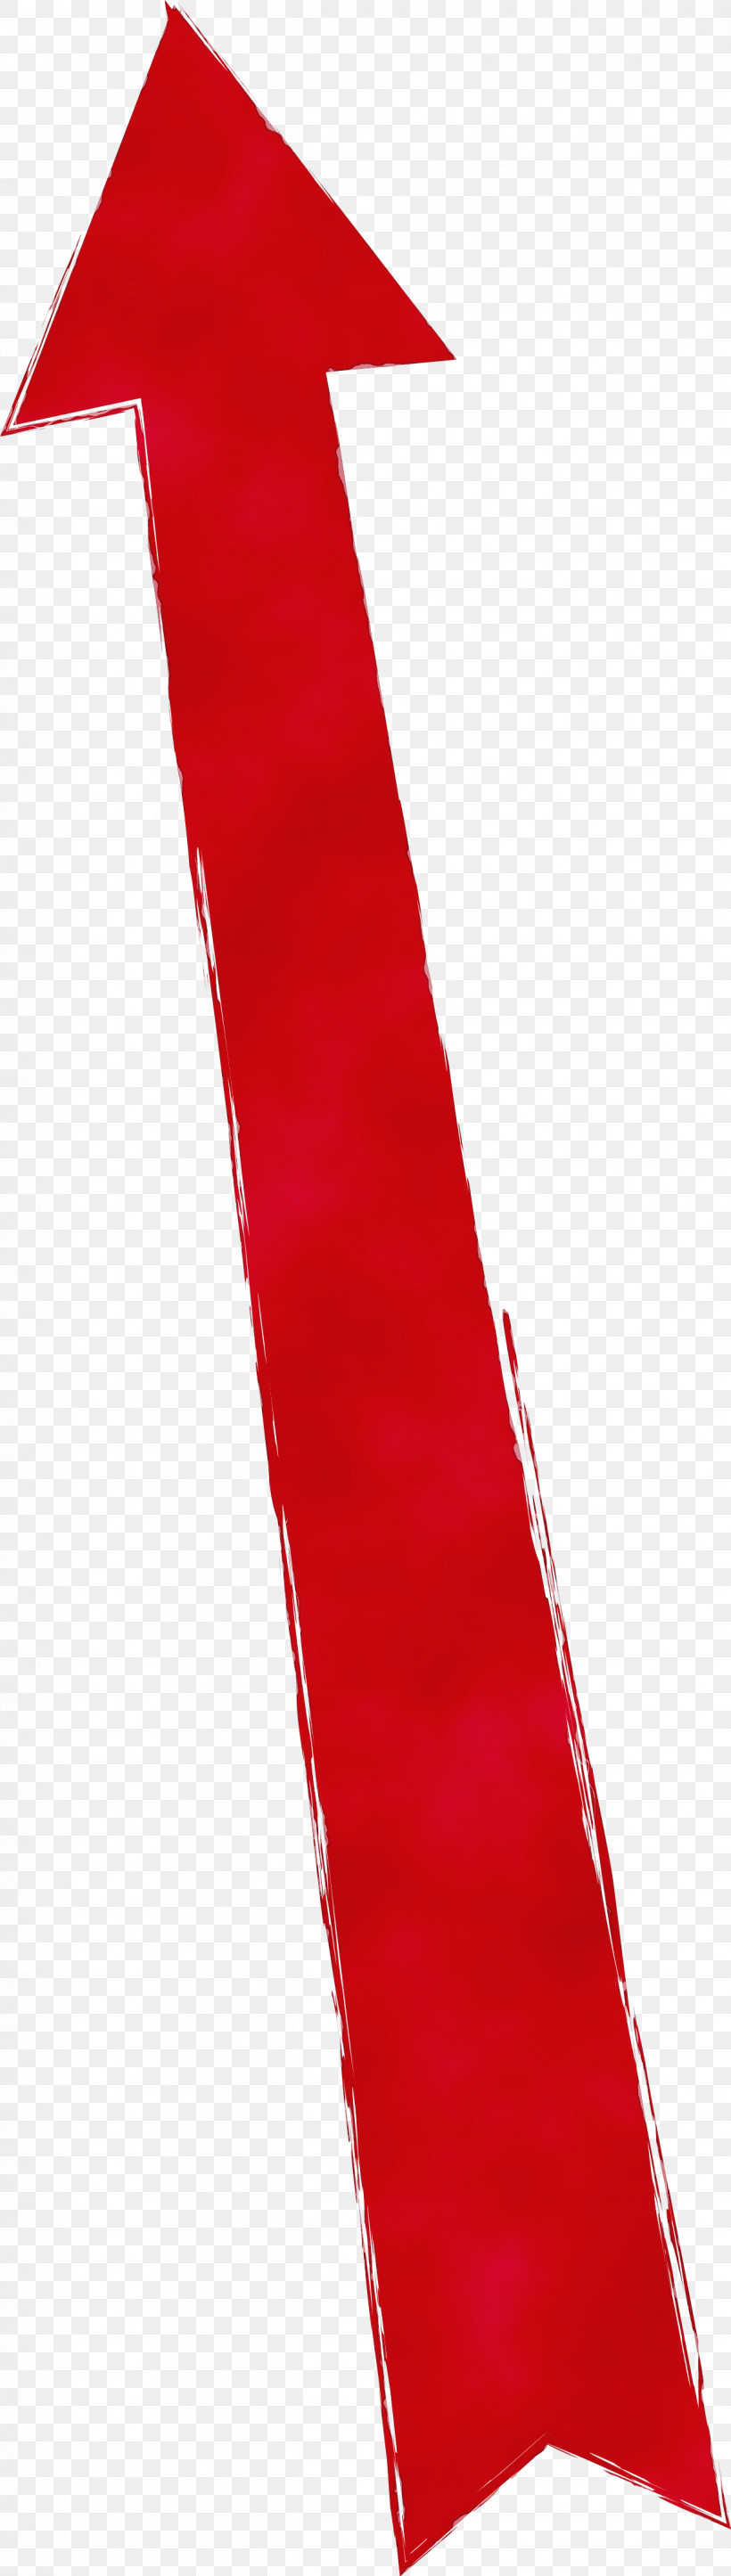 Red Material Property, PNG, 1222x4309px, Rising Arrow, Material Property, Paint, Red, Watercolor Download Free